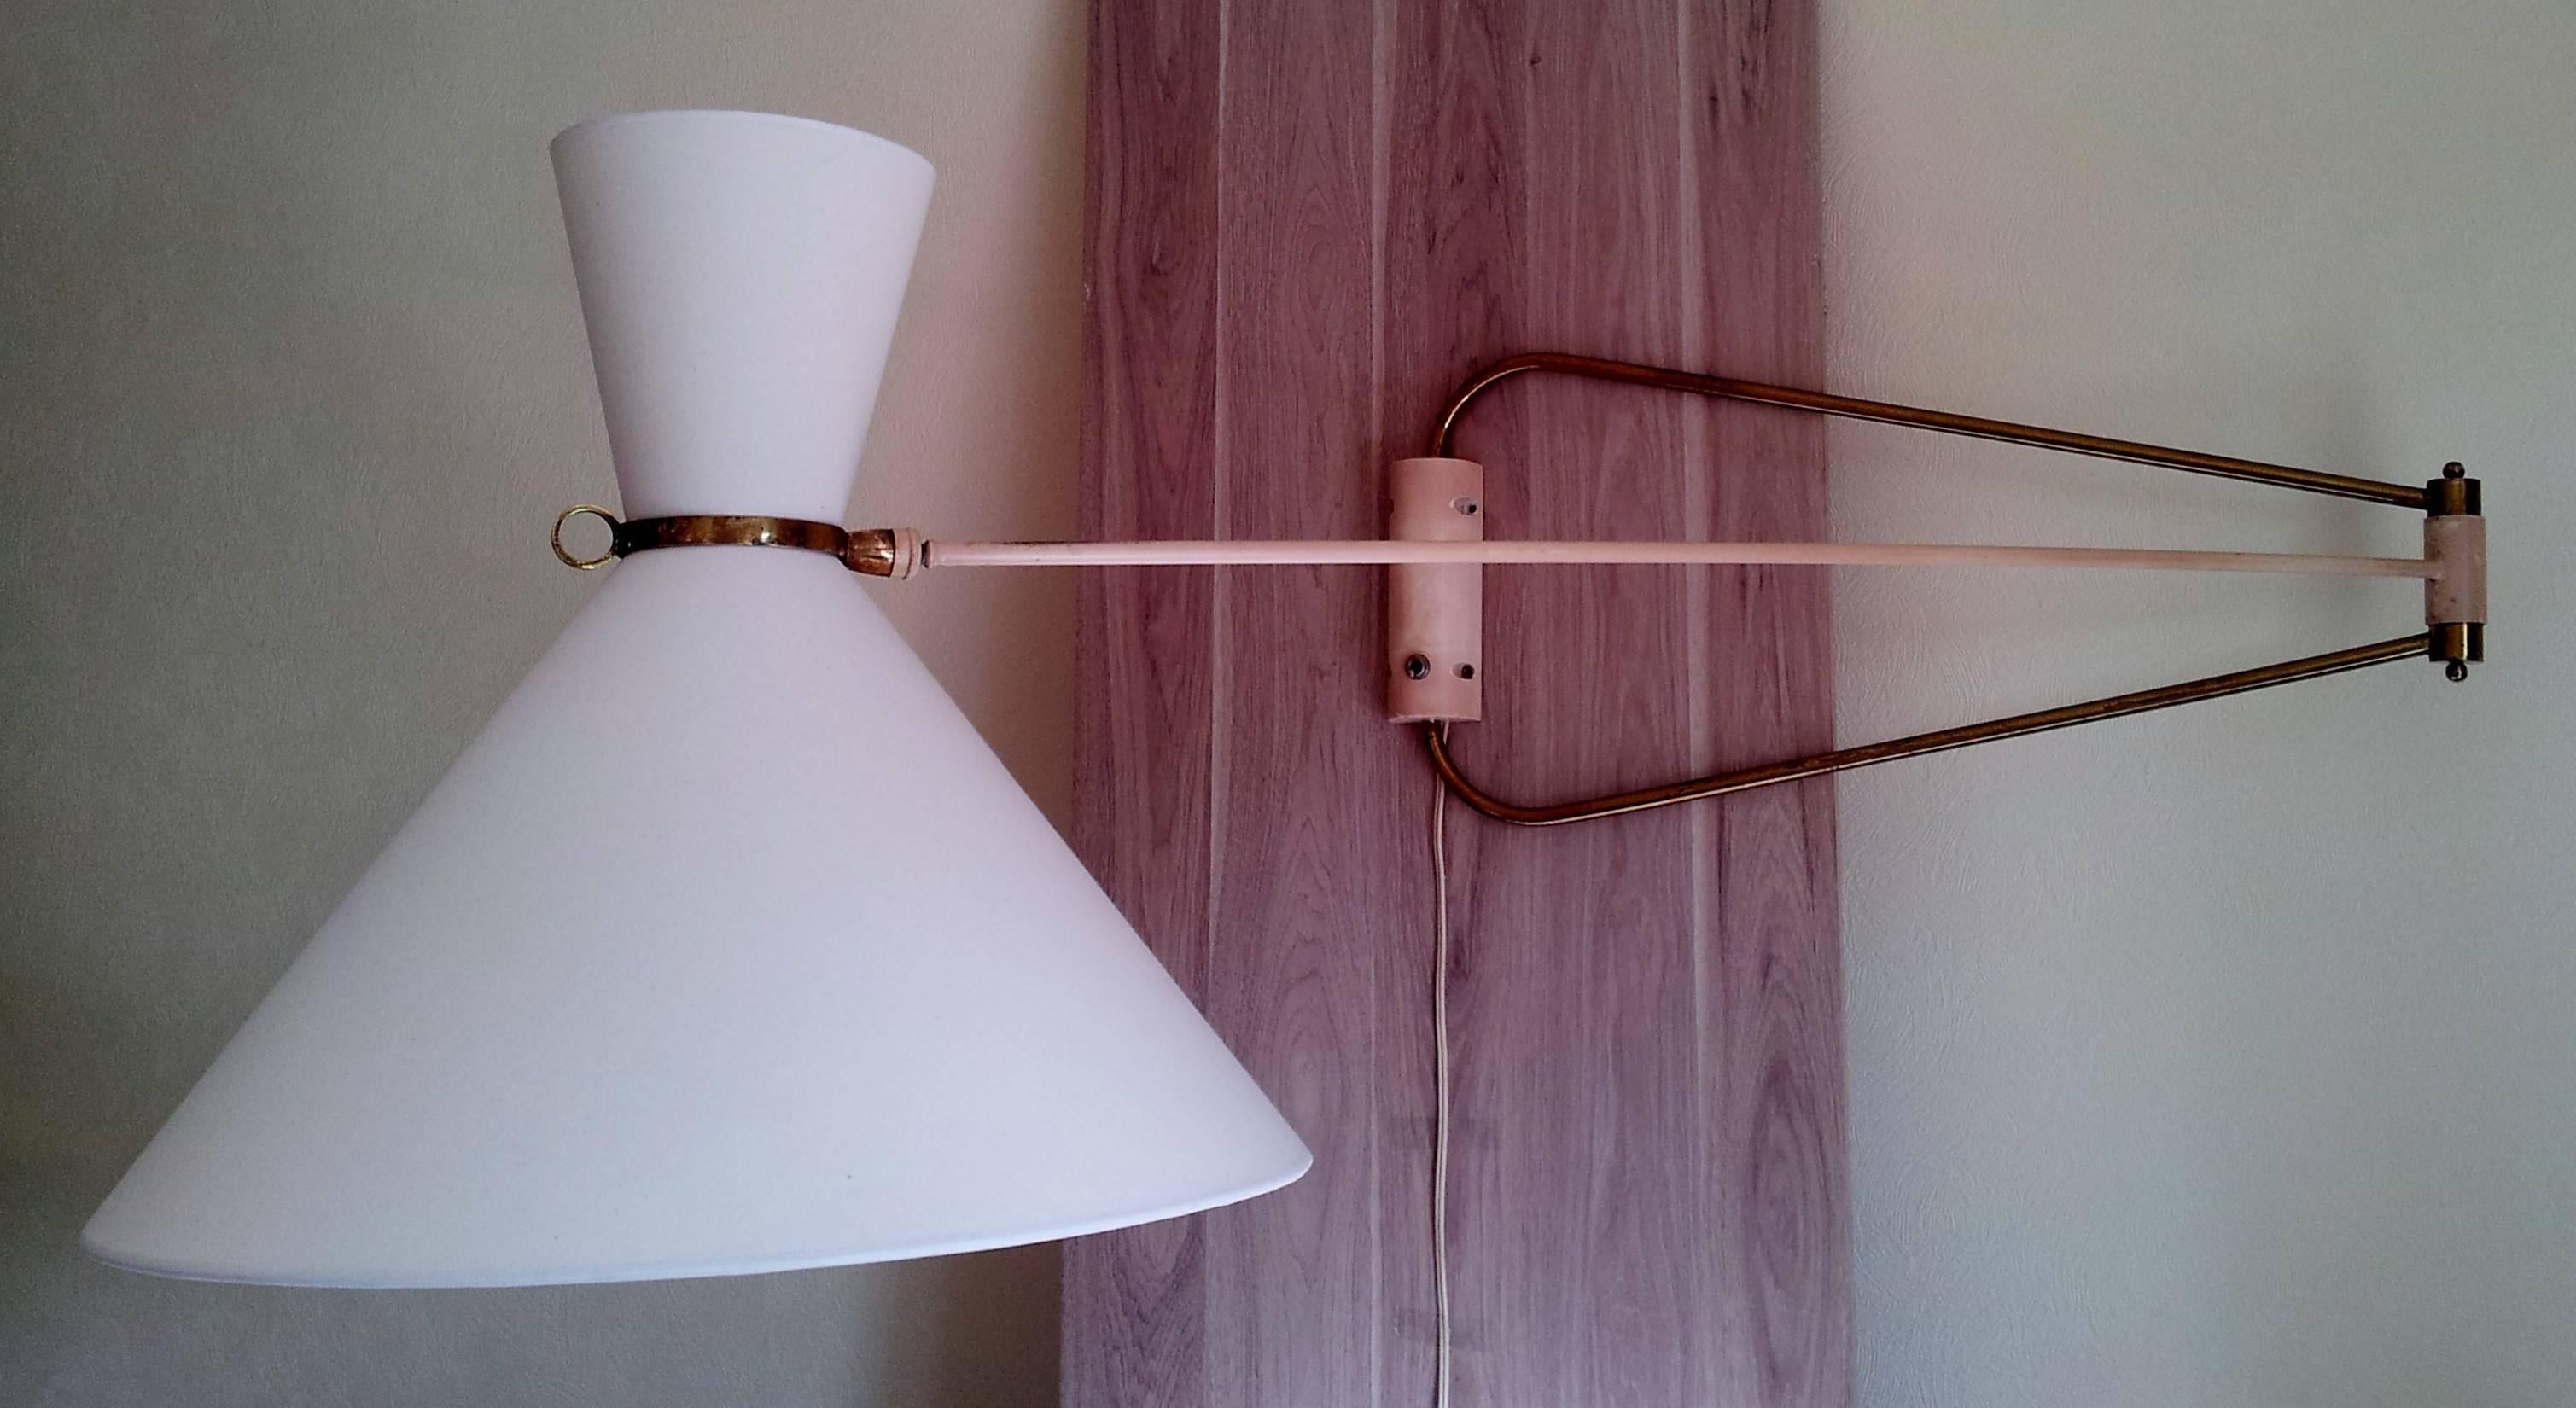 Authentic double swing arms wall lamp designed by Robert Mathieu (1921-2002) I 1951 to 1954.
Edition R. Mathieu 